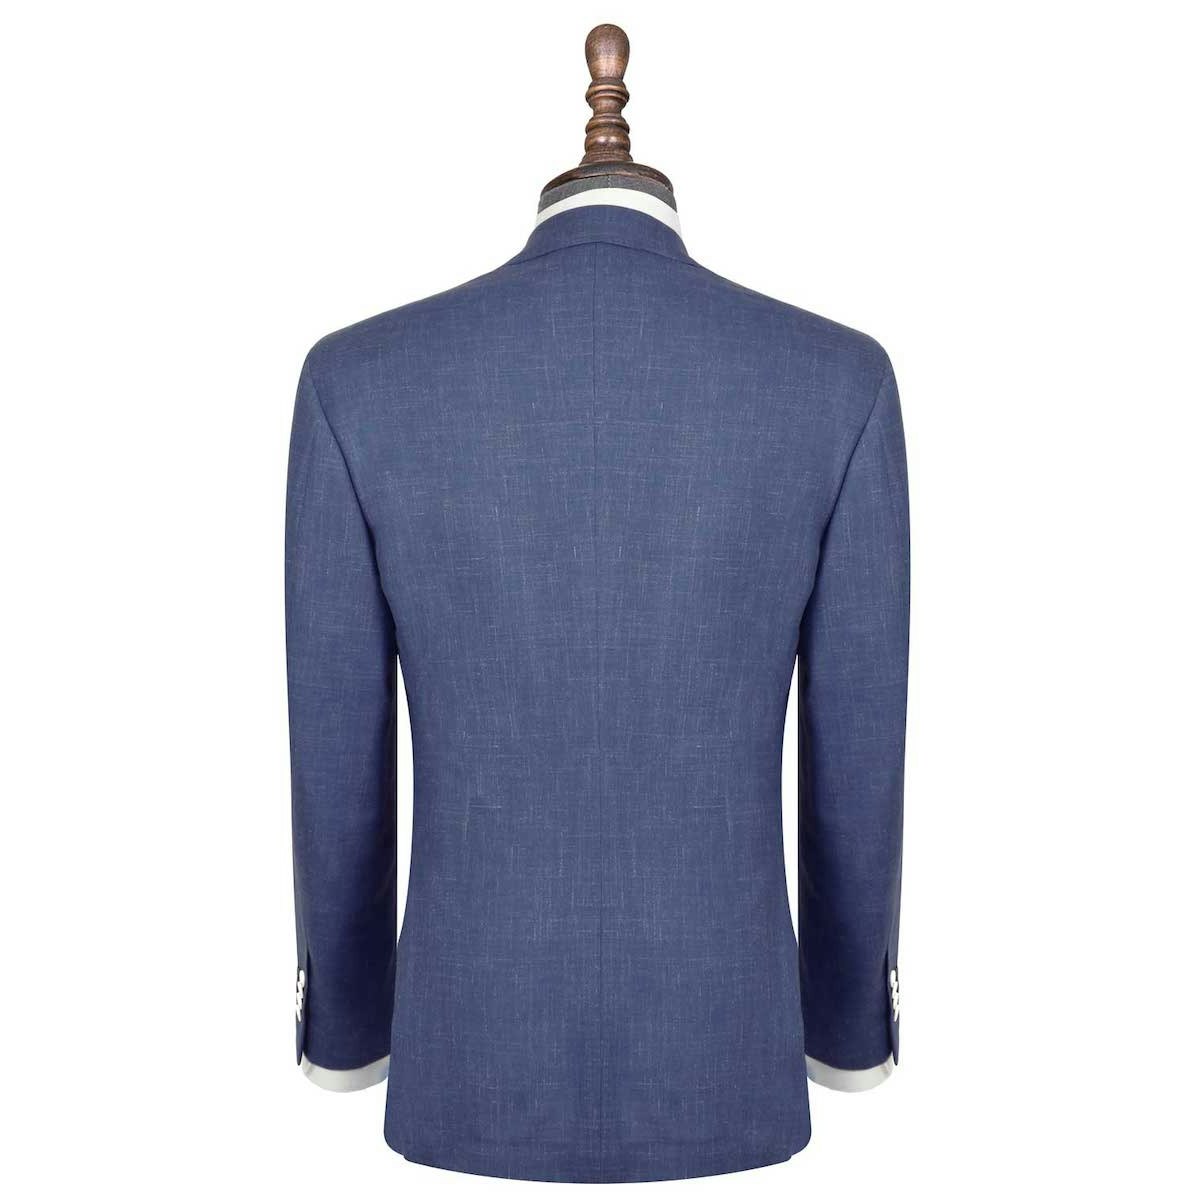 InStitchu Collection Navy and White Slub Wool Linen Blend Jacket